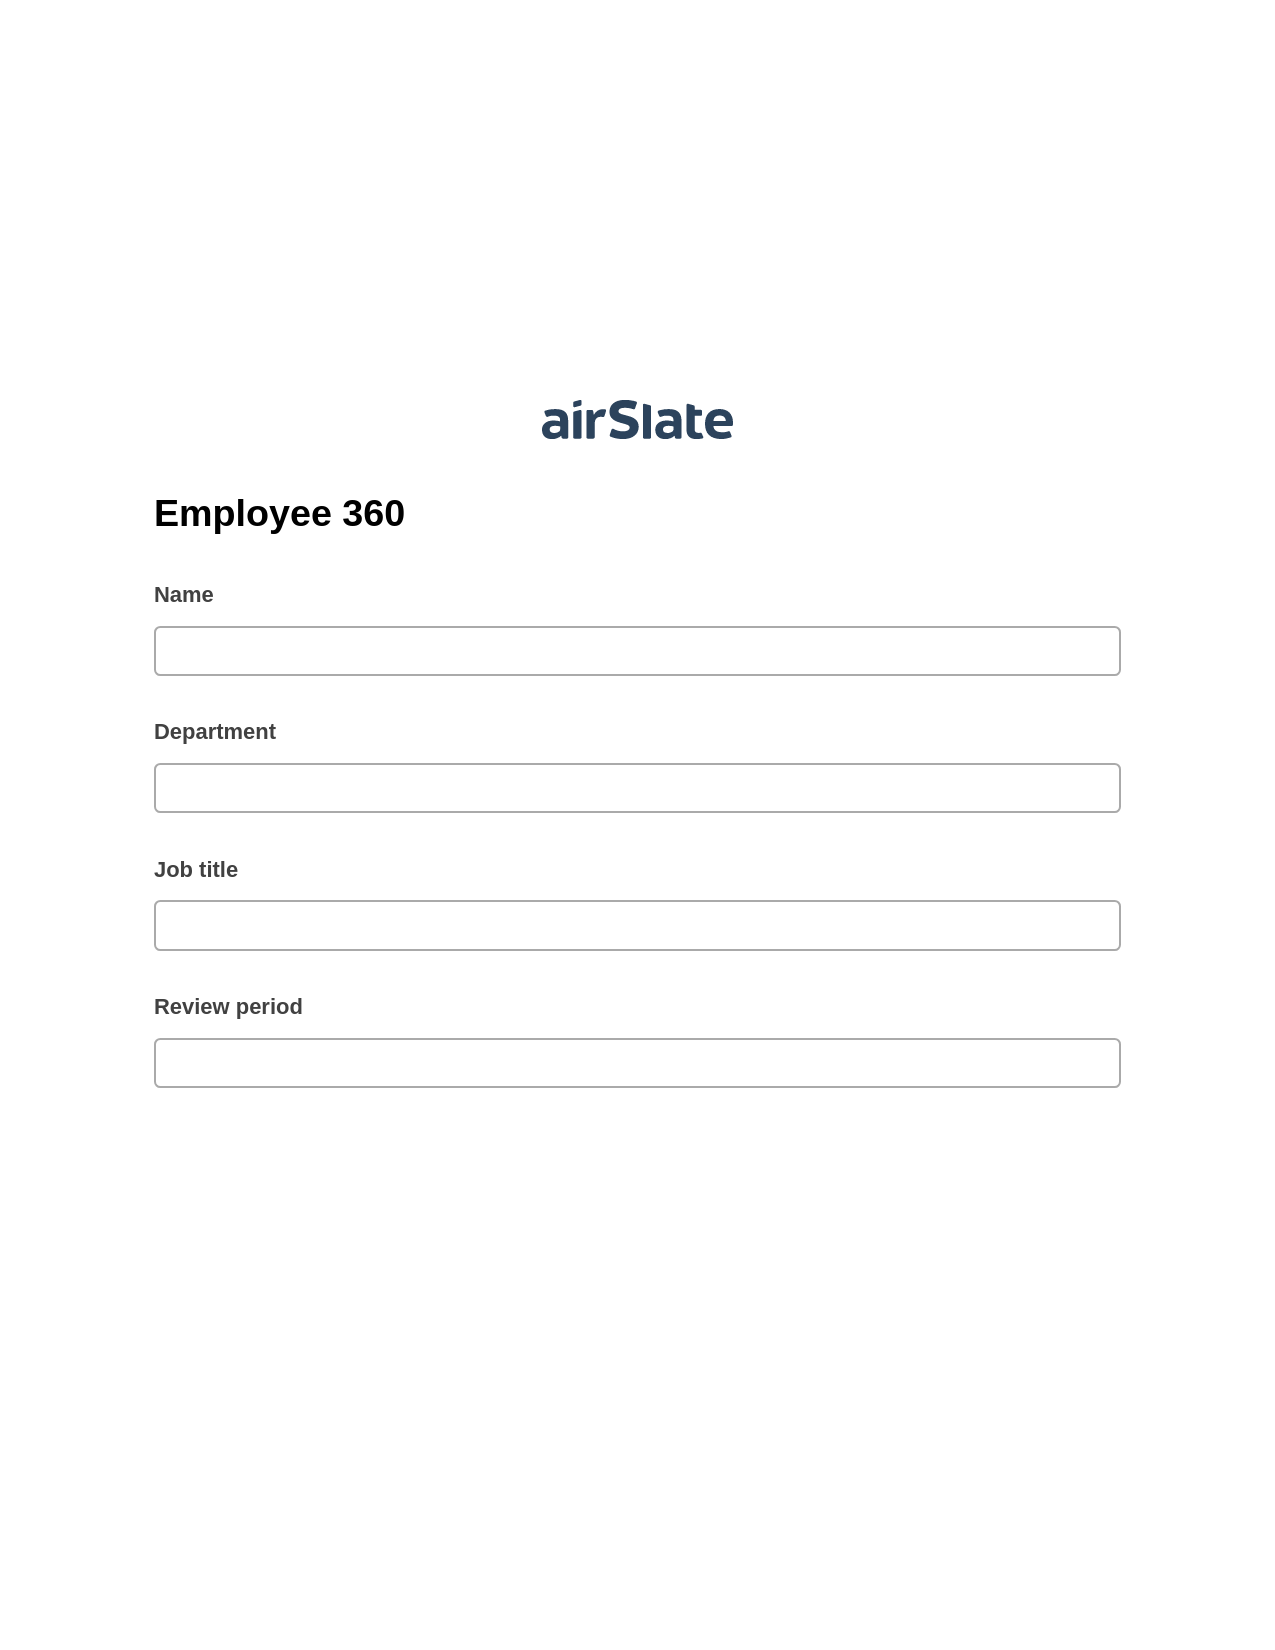 Employee 360 Pre-fill Dropdowns from Google Sheet Bot, Update MS Dynamics 365 Record Bot, Post-finish Document Bot